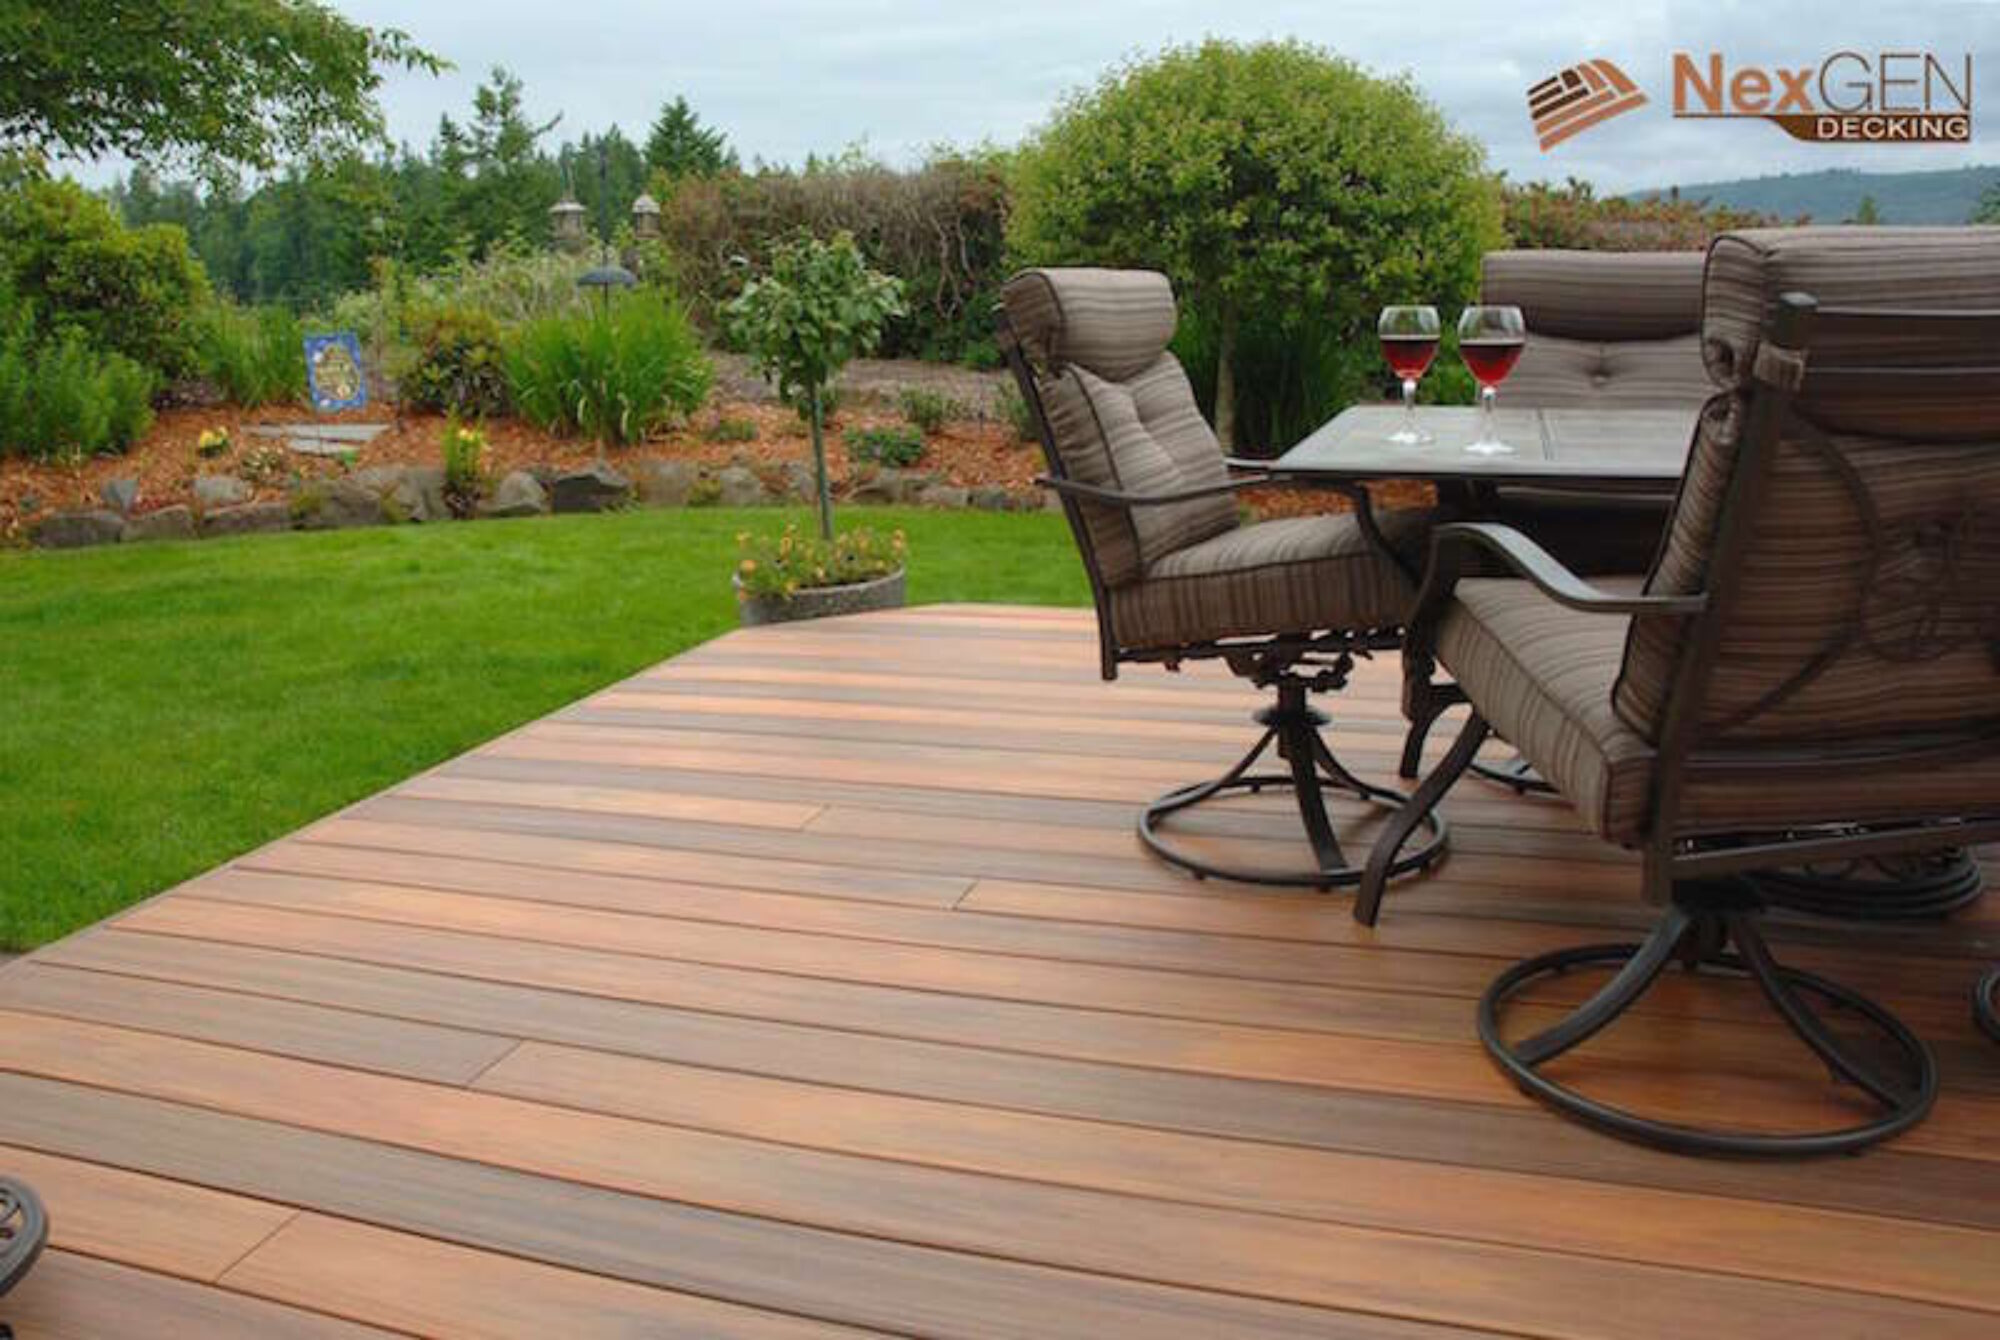 Outdoor Furniture to Complement Your New Decking